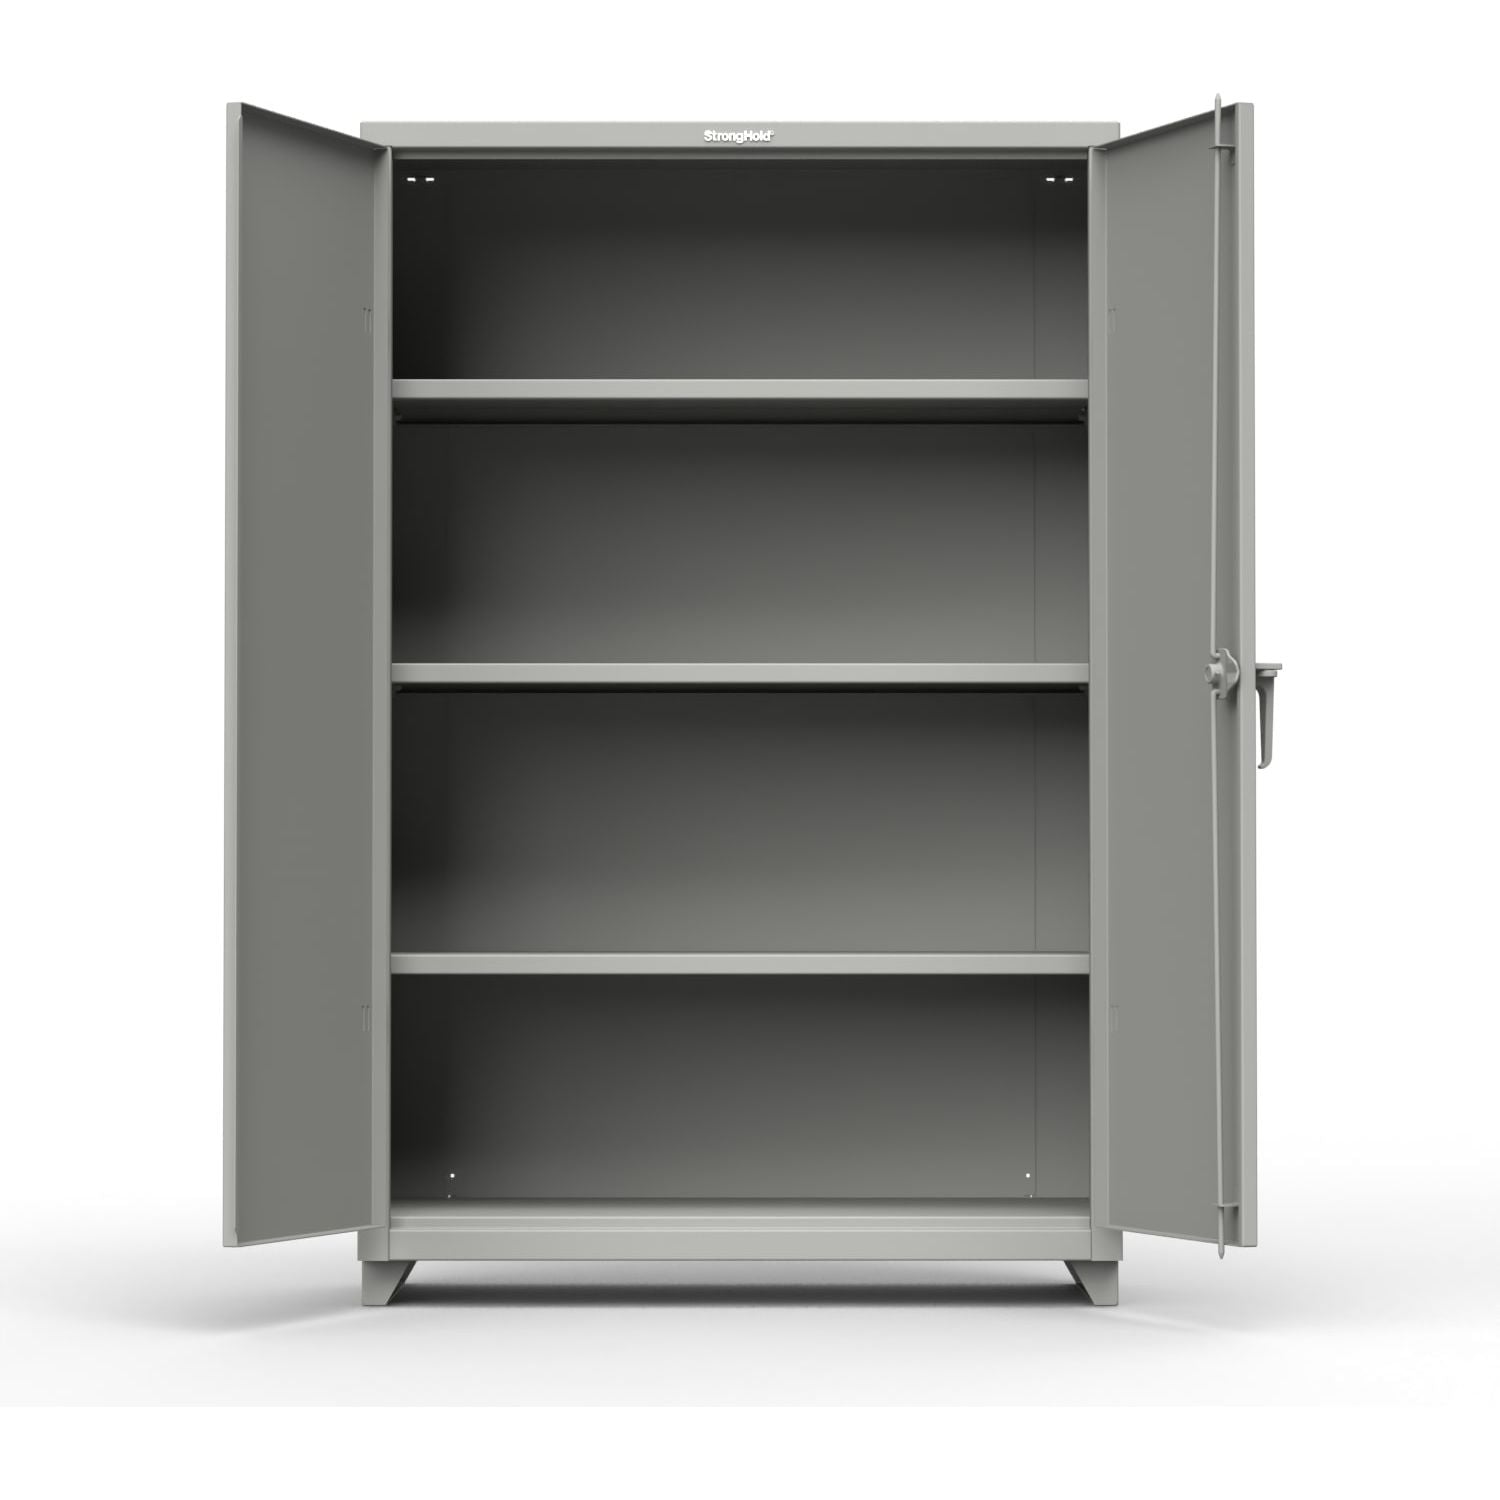 Dim Gray Strong Hold Extra Heavy Duty 14 GA Cabinet with 3 Shelves